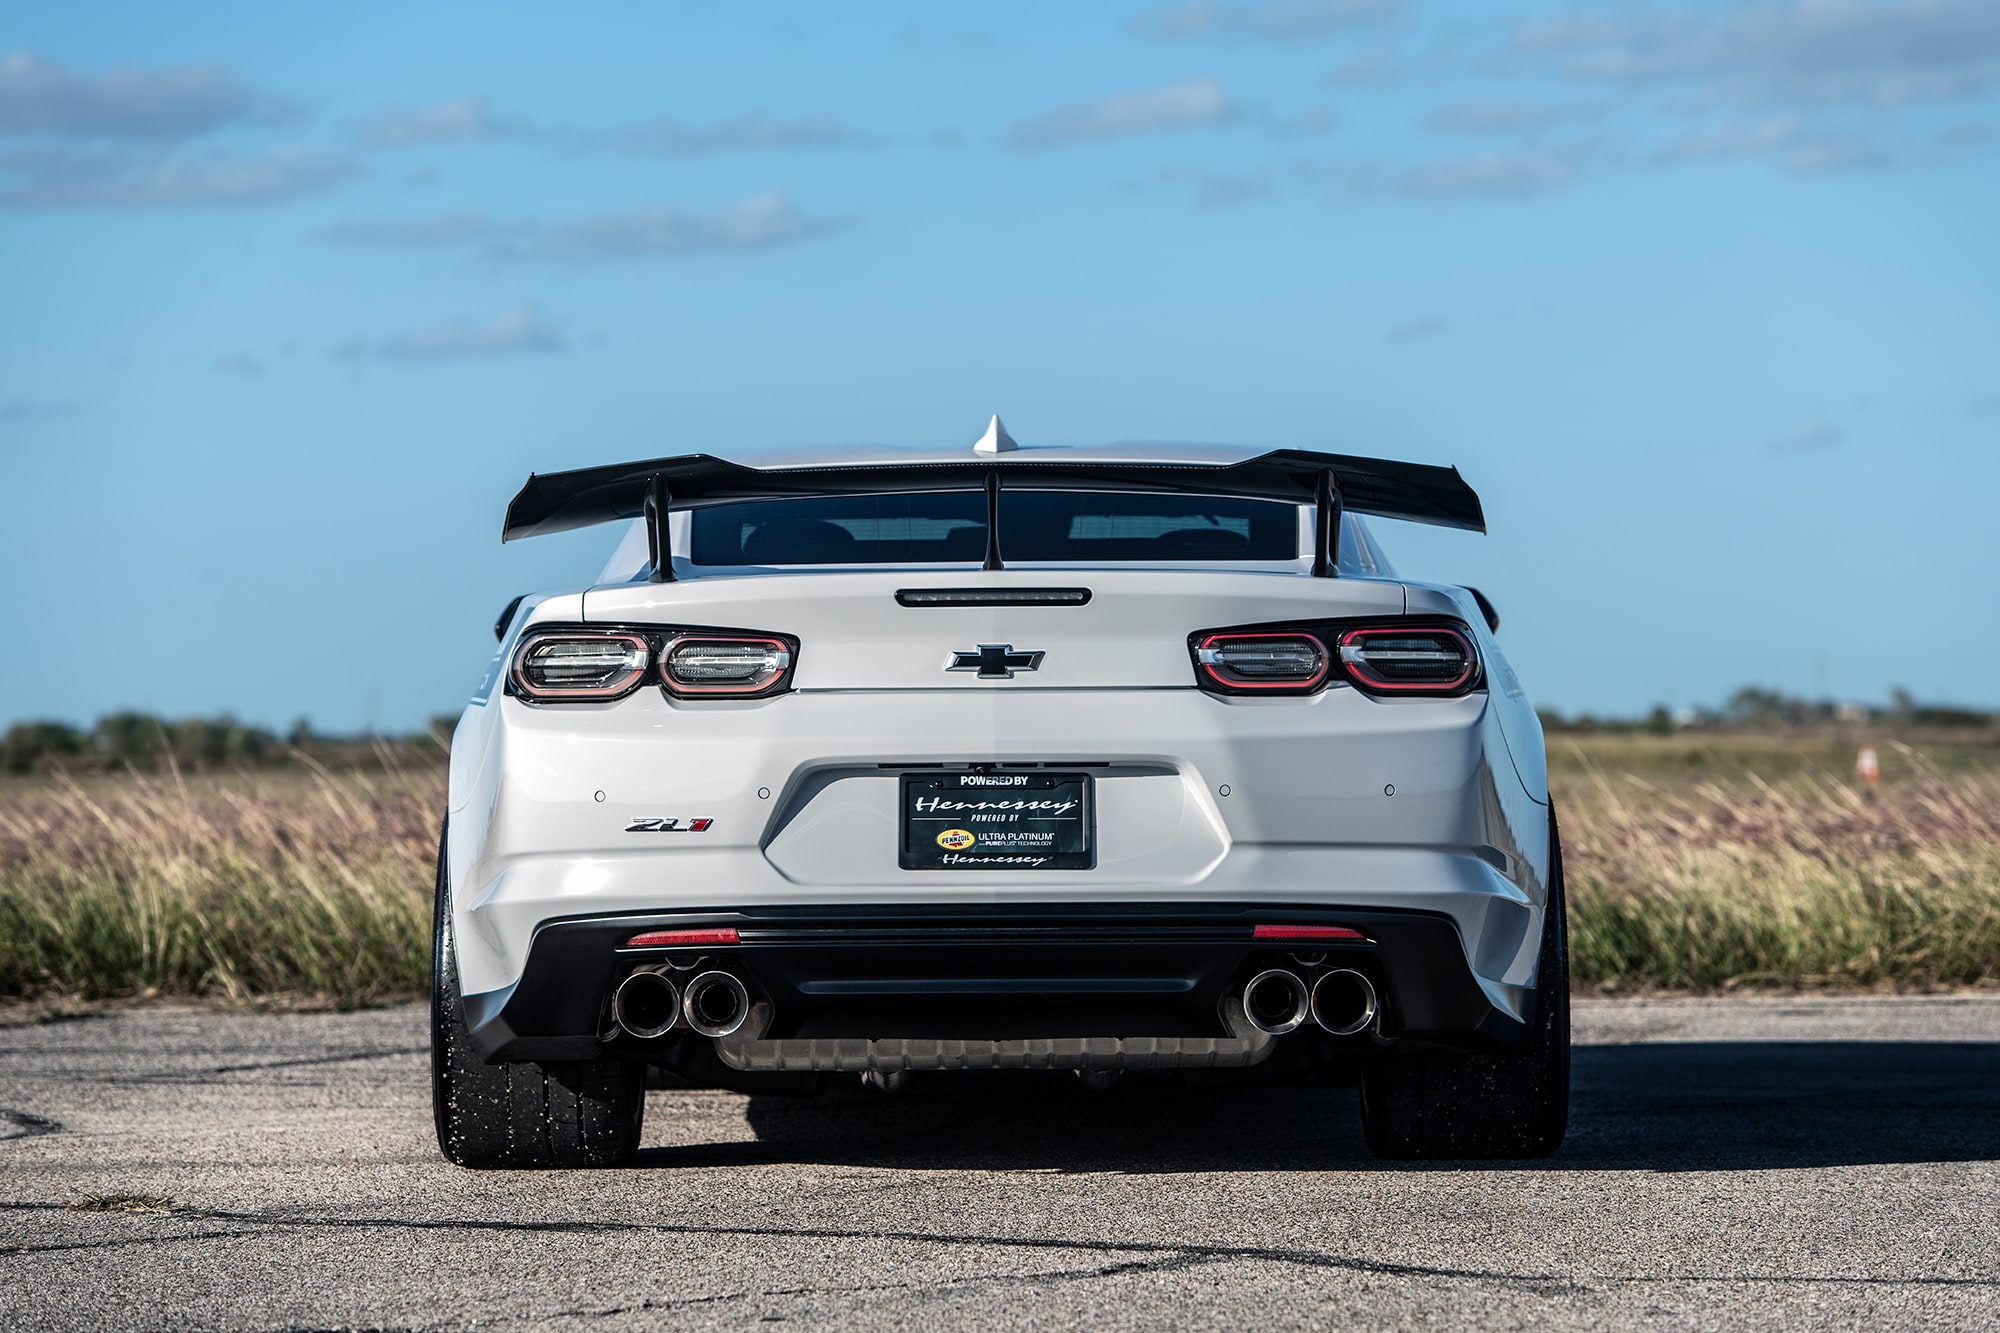 Watch Hennessey Build the Final “Resurrection” 1,200HP Chevrolet